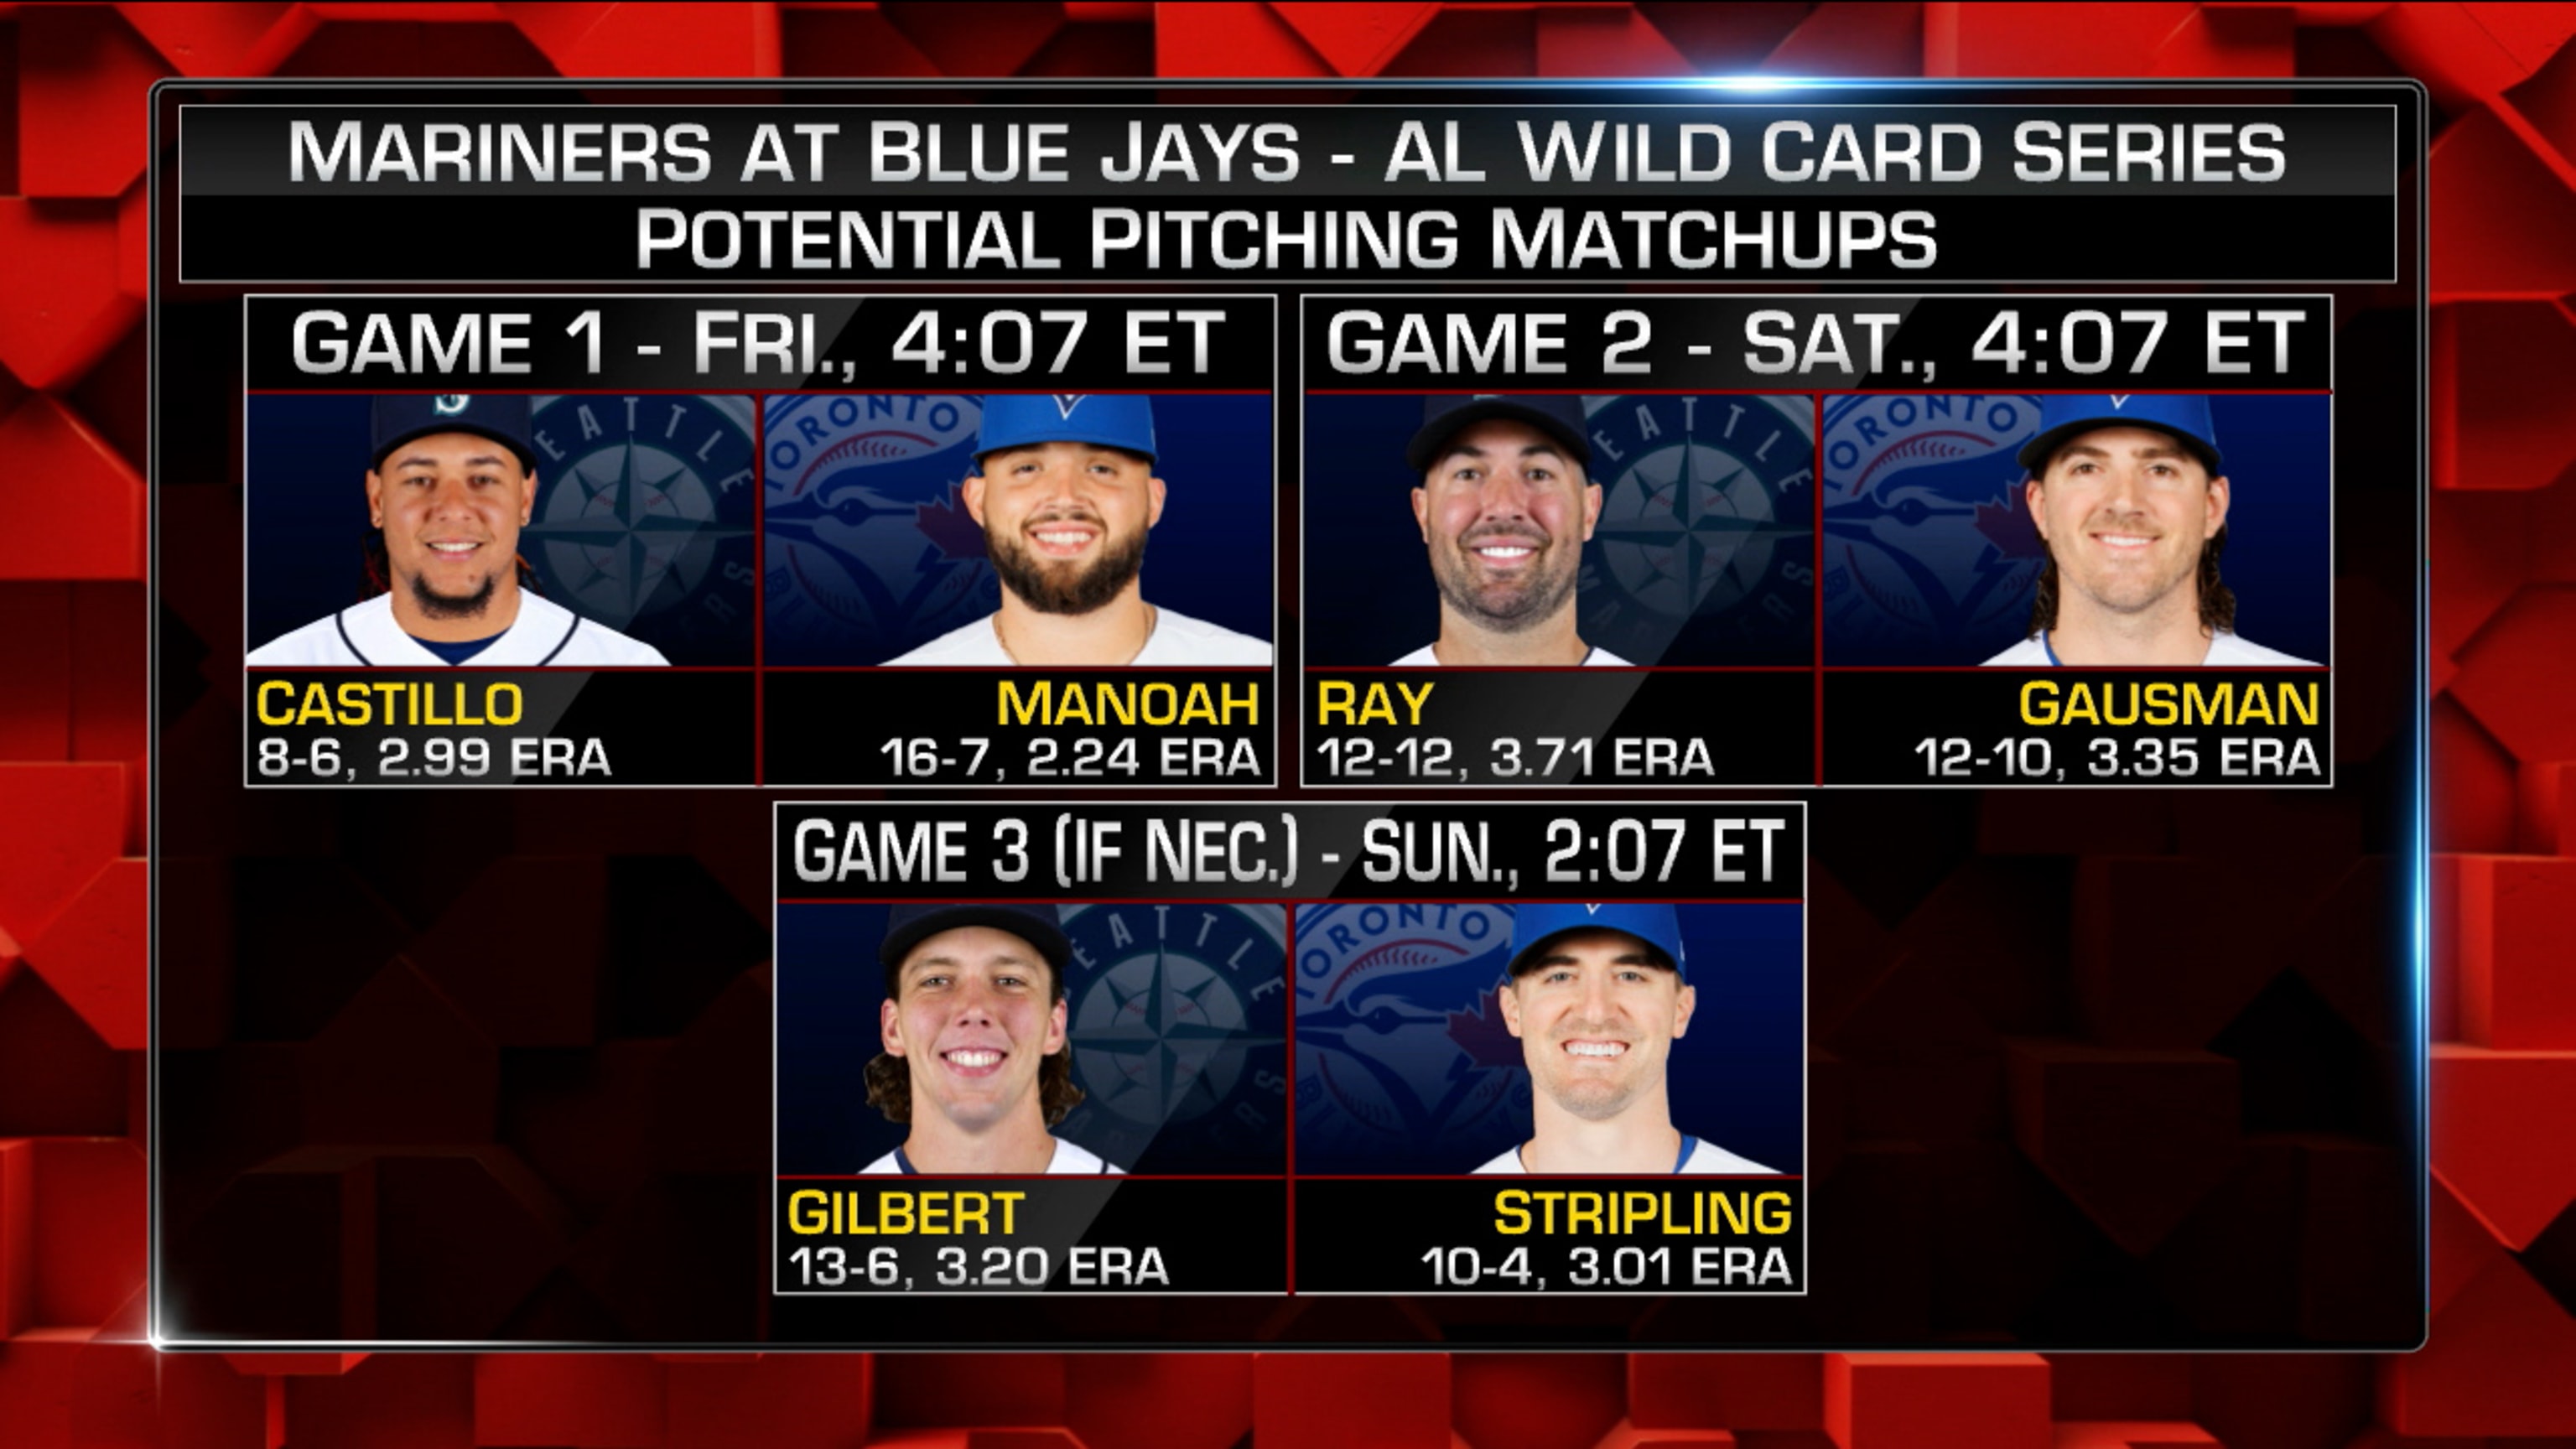 Previewing the AL Wild Card